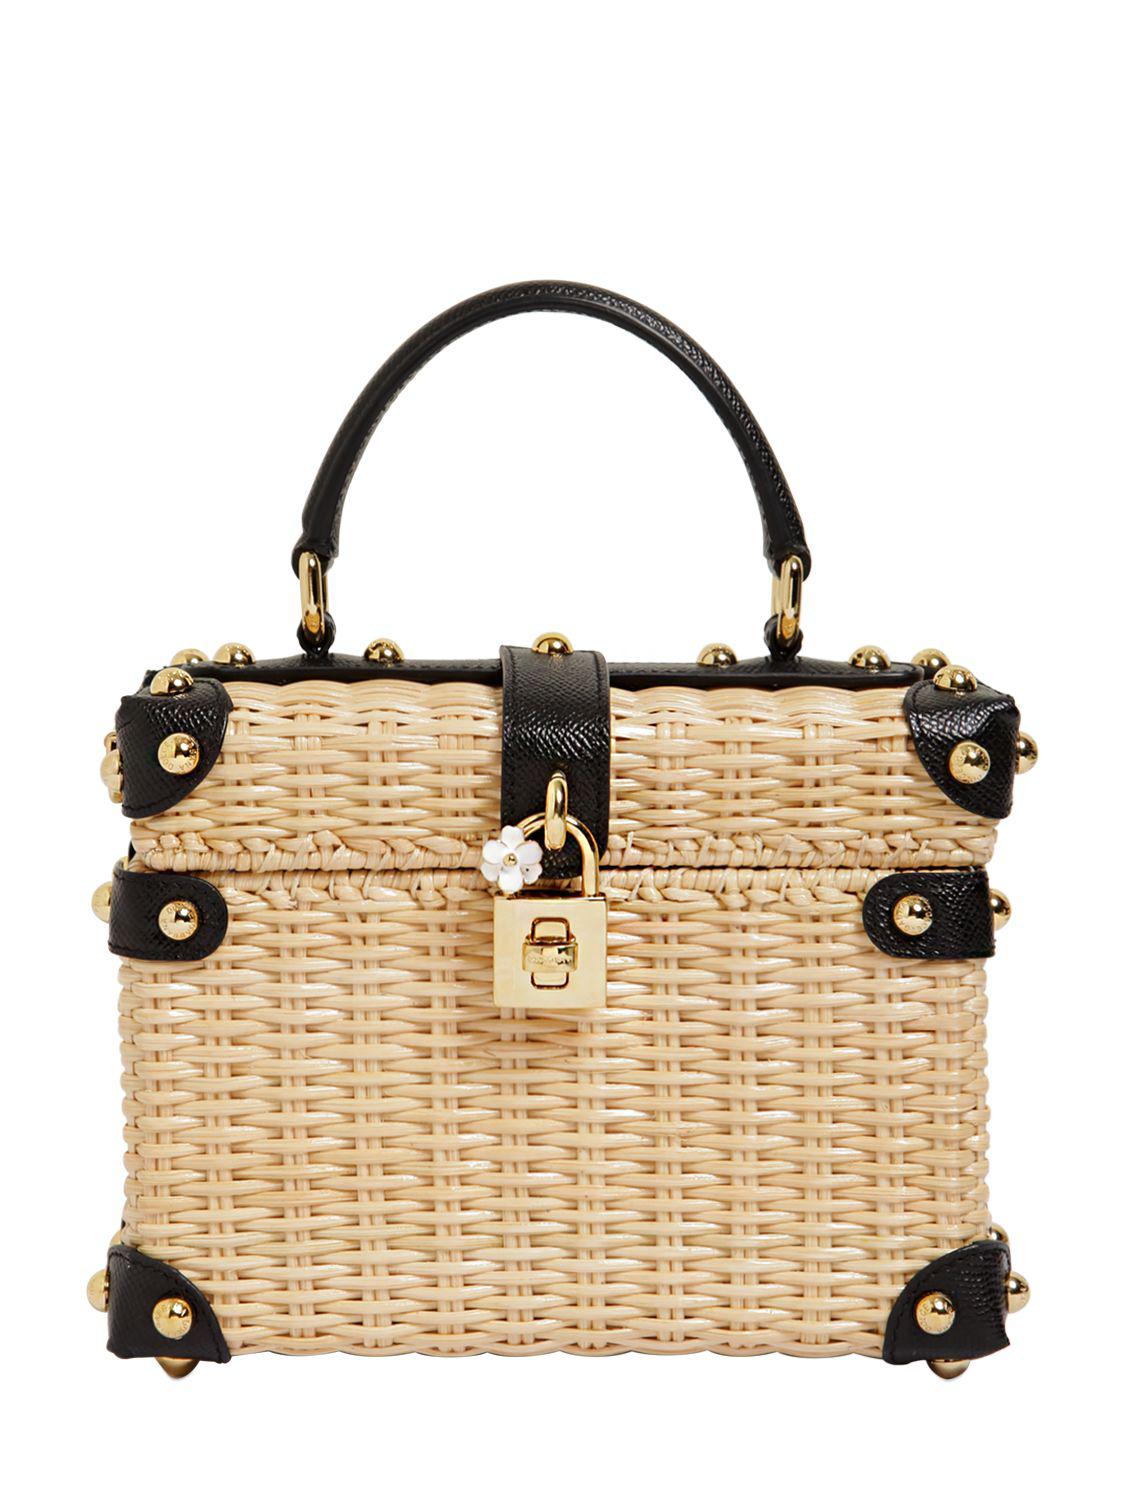 Lyst - Dolce & gabbana Dolce Box Wicker & Dauphine Leather Bag